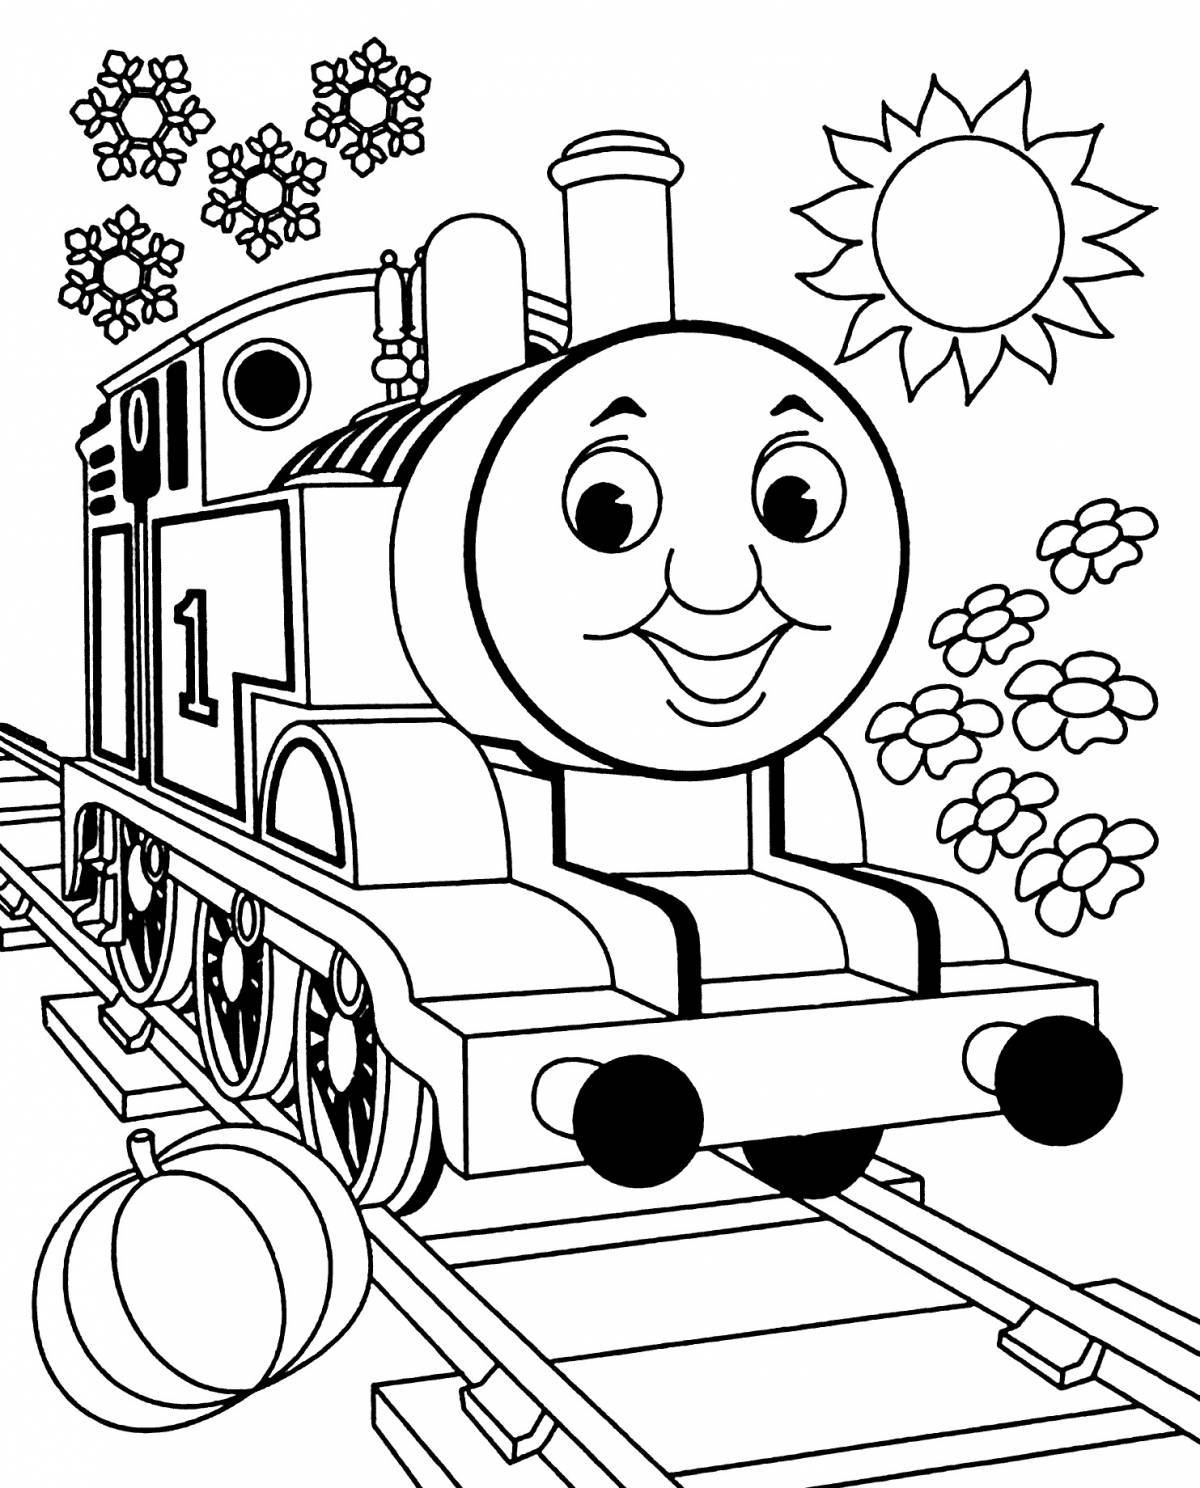 Thomas the Tank Engine perfect coloring book